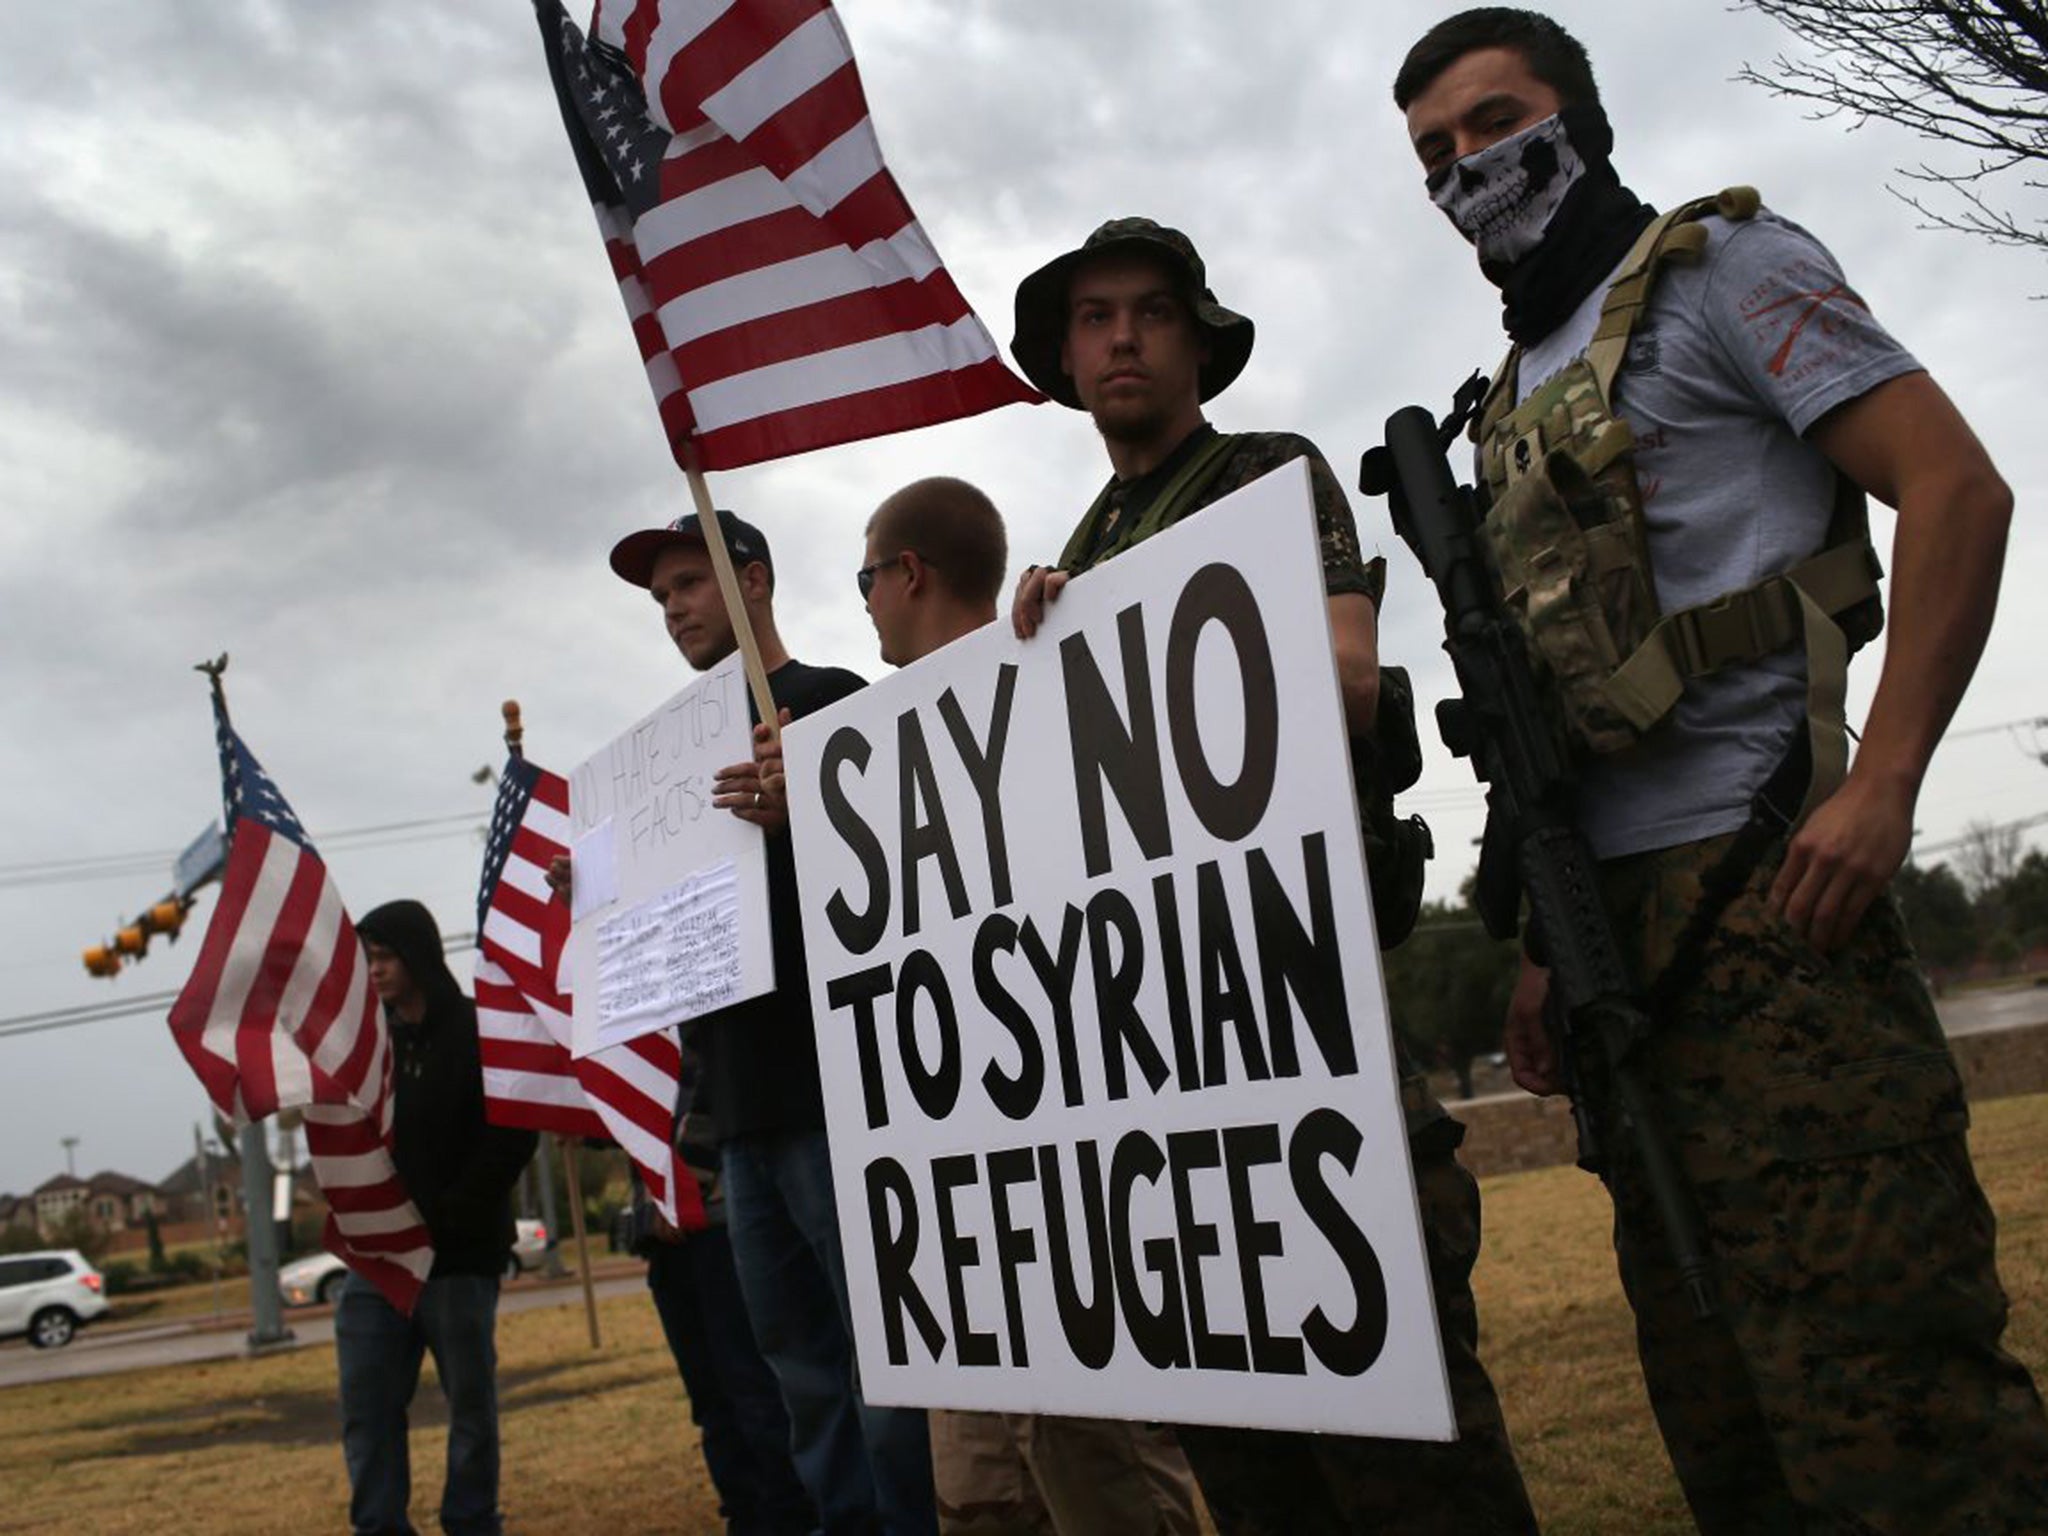 Armed protesters from the so-called Bureau of American-Islamic Relations (BAIR), take part in a demonstration in front of a mosque on December 12, 2015 in Texas